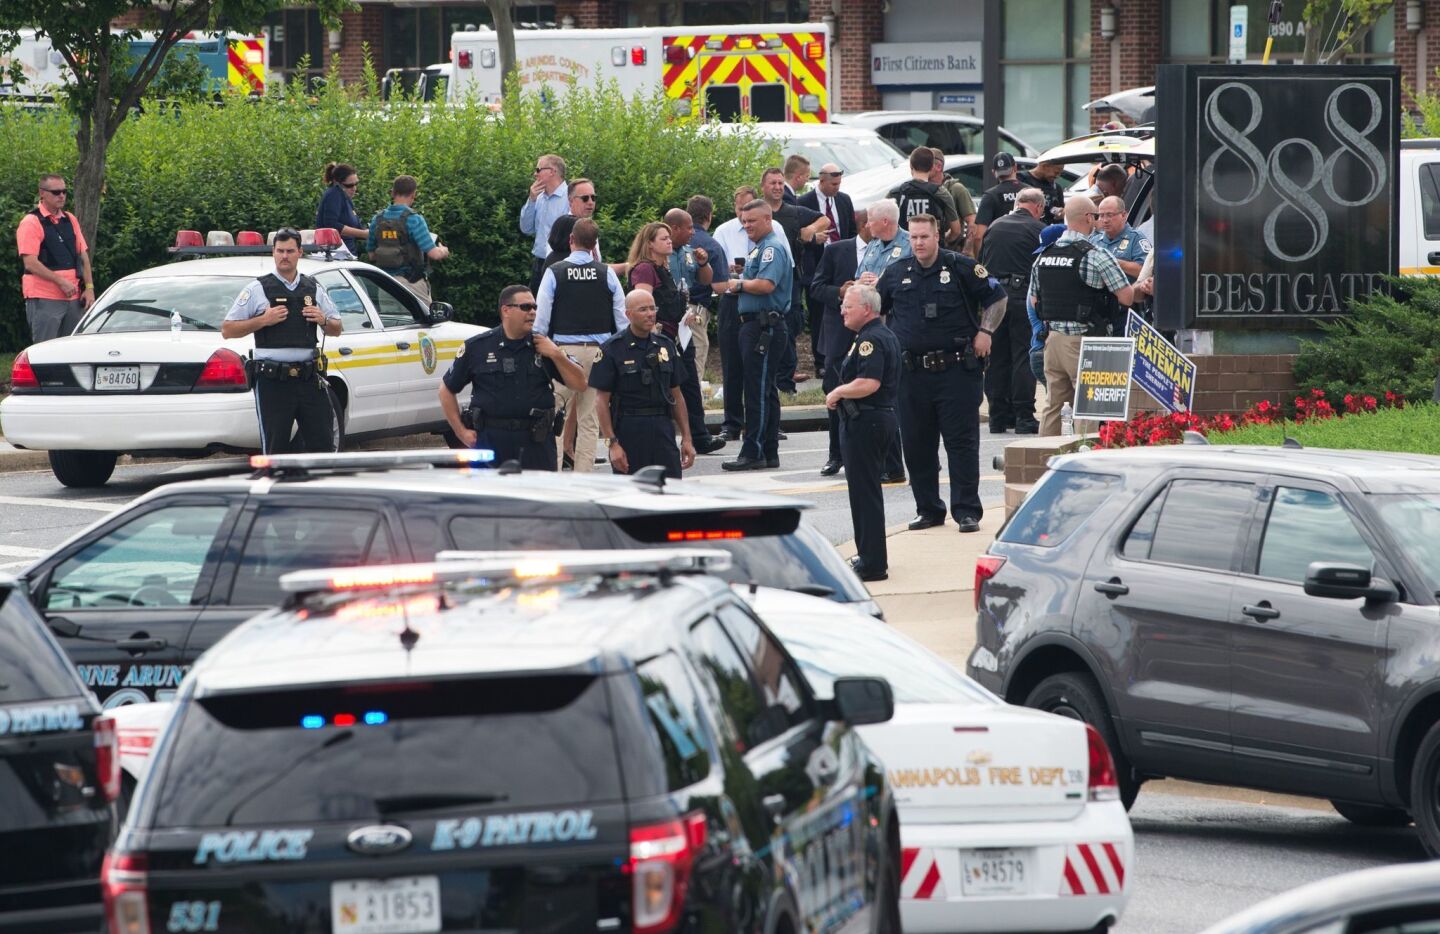 Law enforcement officers respond to a shooting at the Capital, a daily newspaper in Annapolis, Md., that killed five.